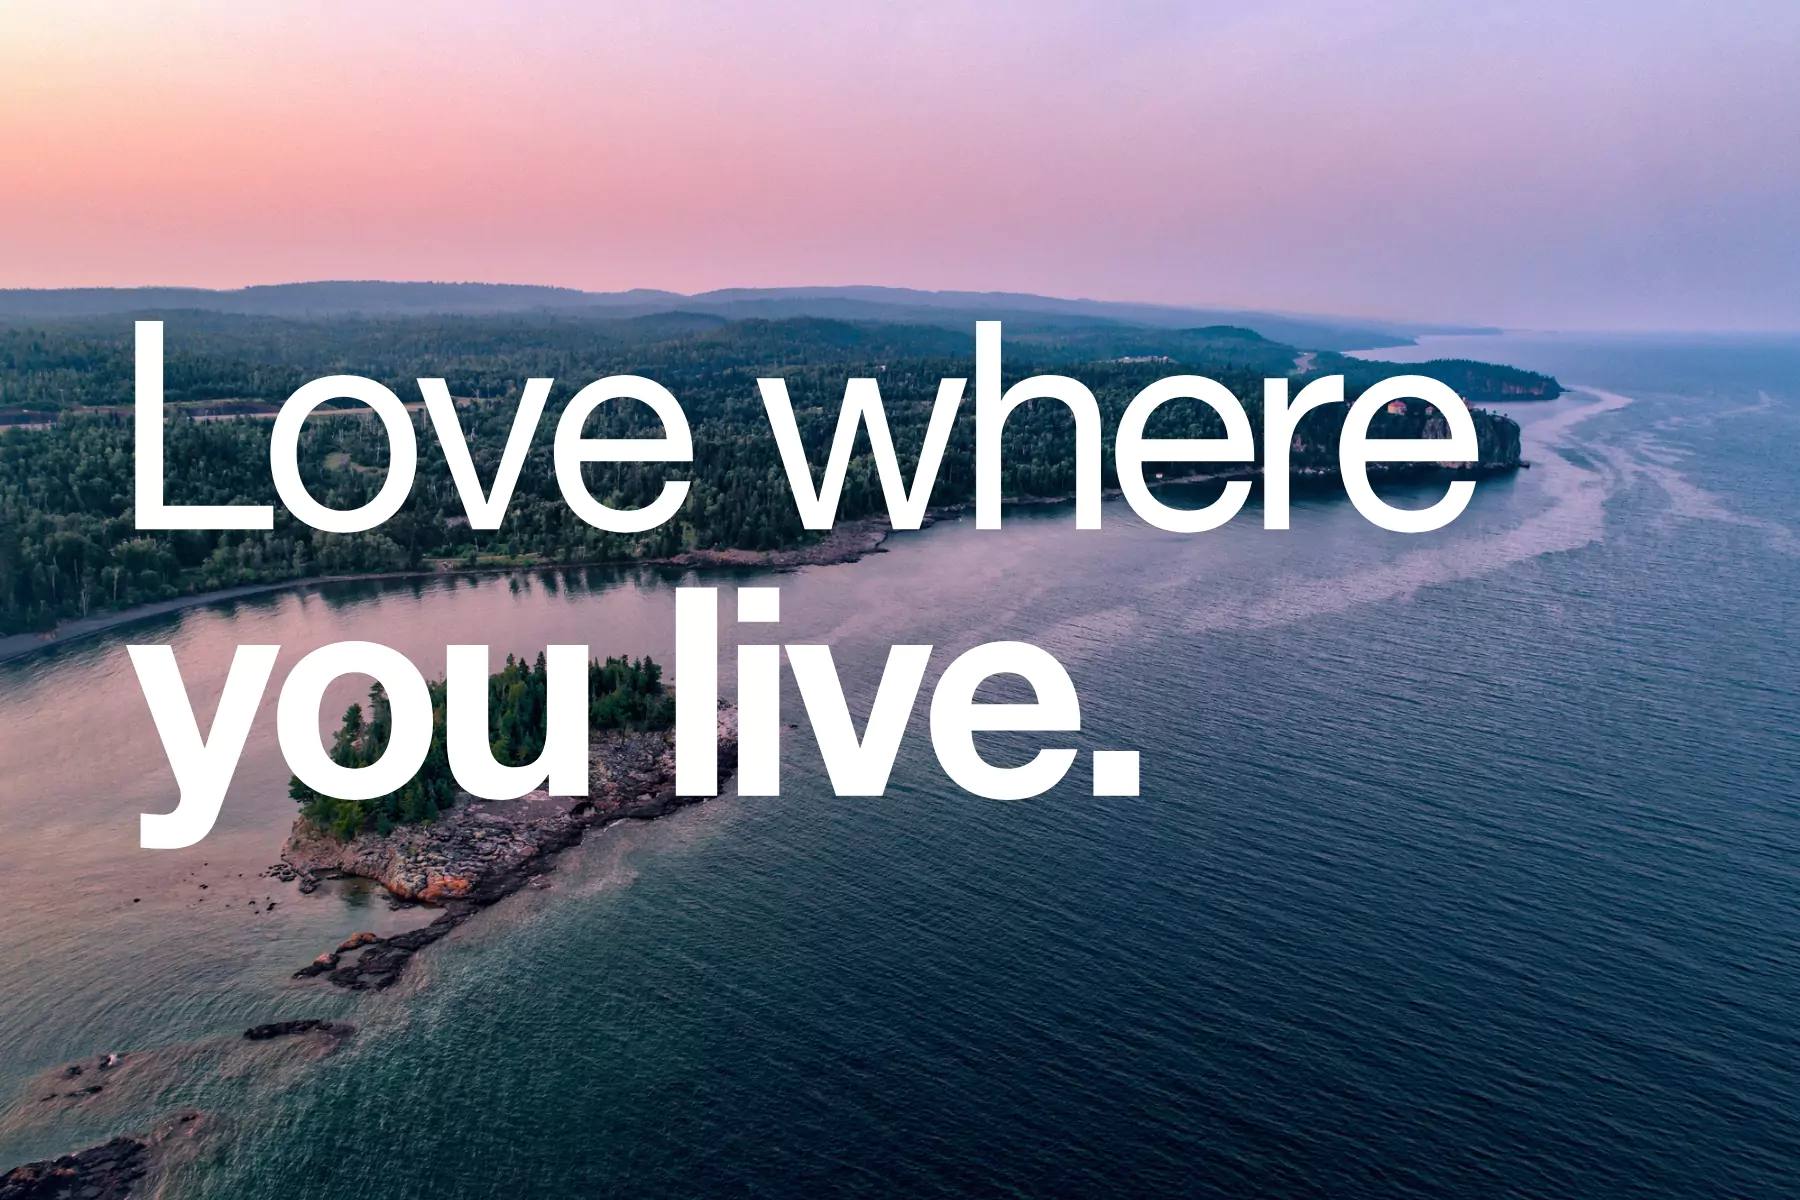 Image of the beautiful North Shore with the overlay "Love where you live."